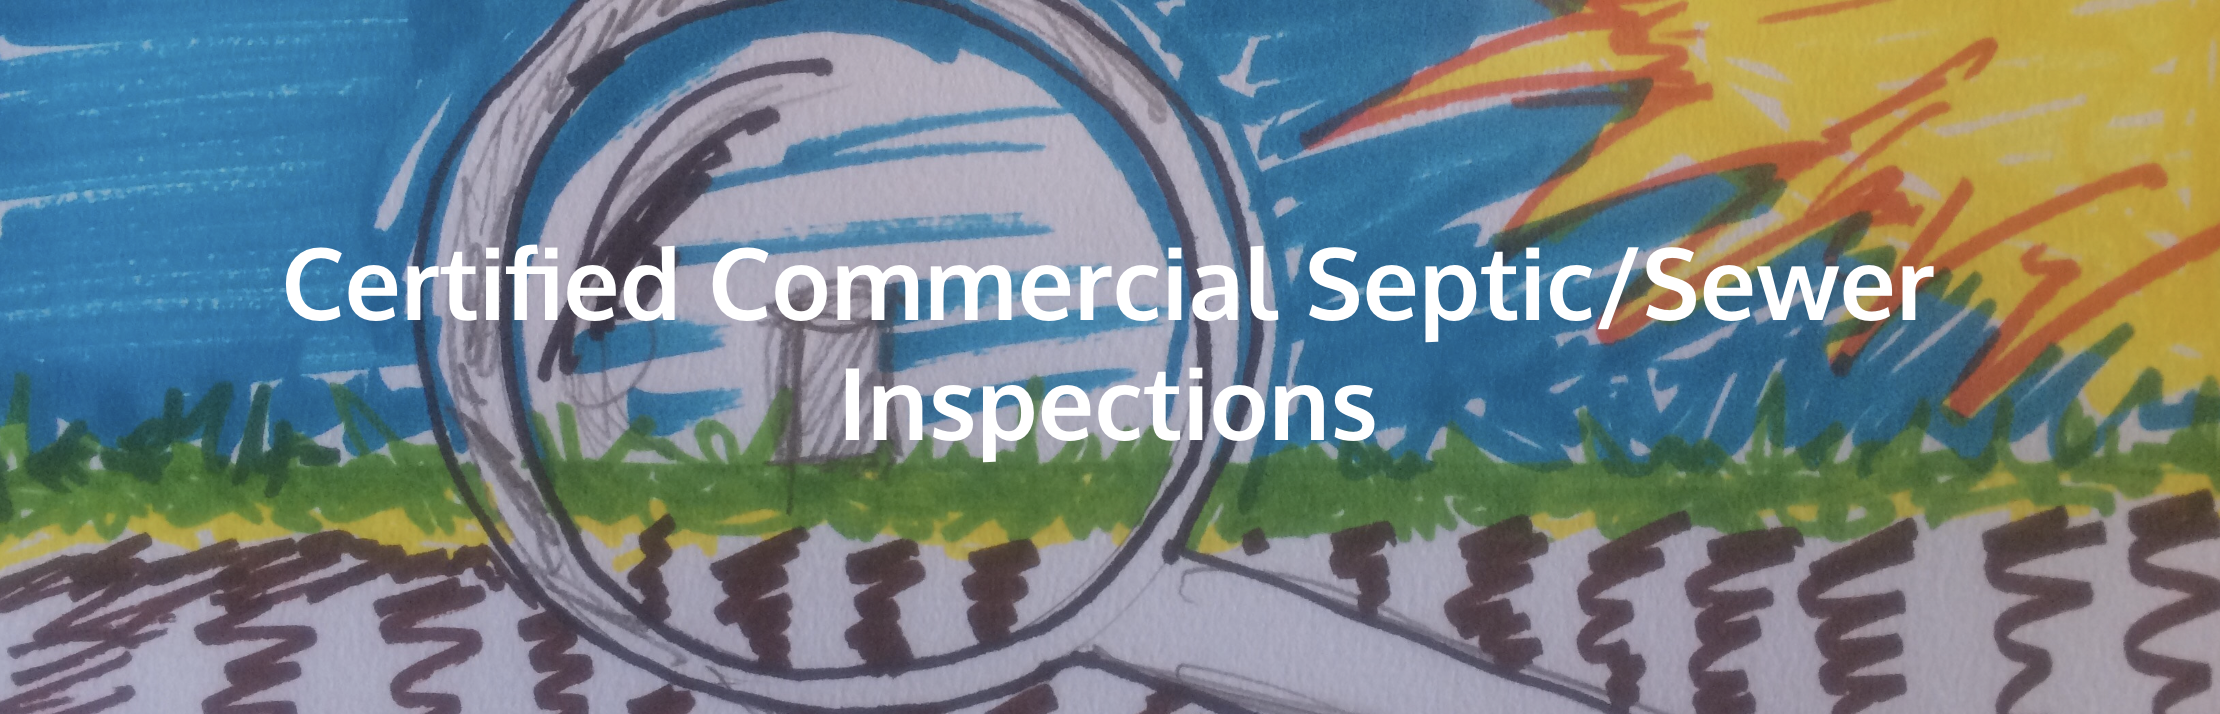 Certified Commercial Septic / Sewer Inspections